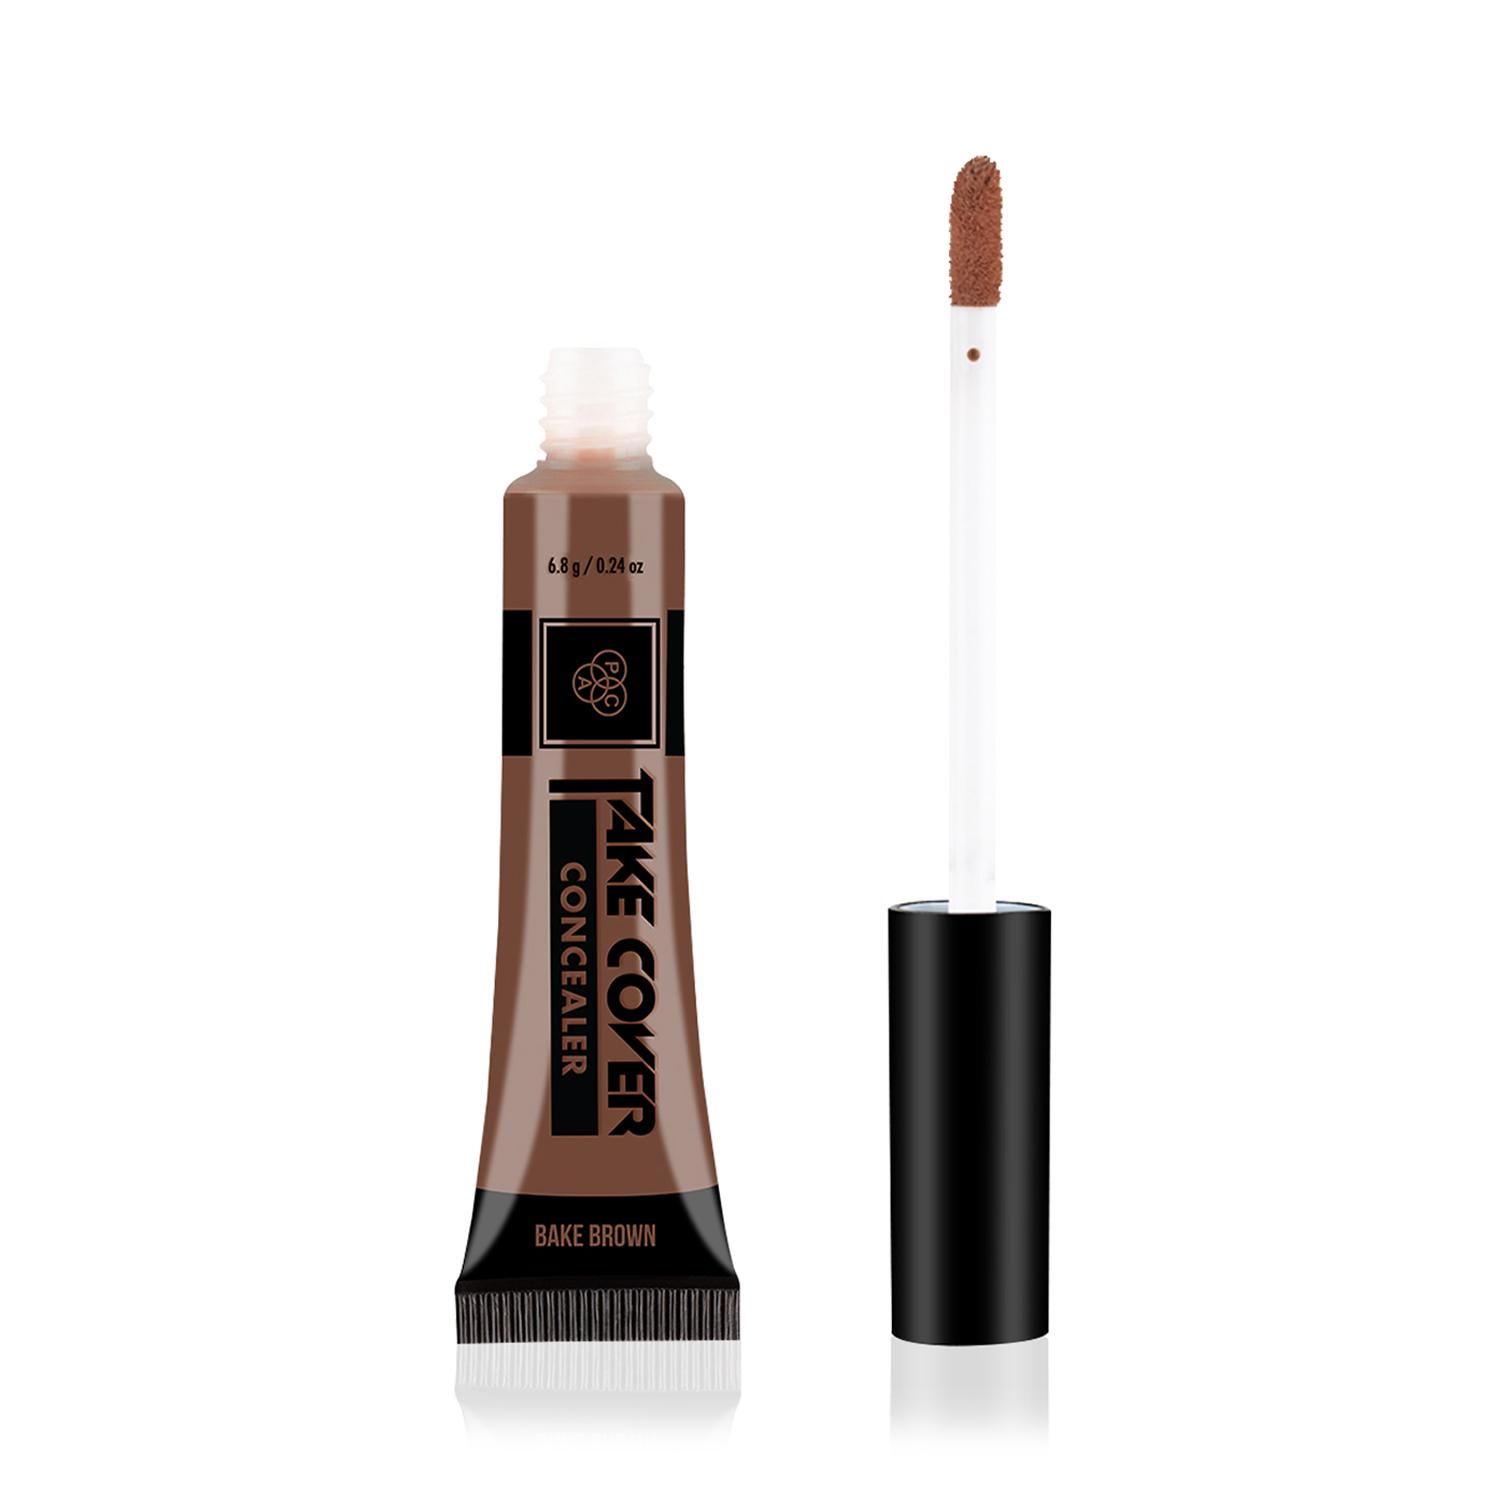 PAC | PAC Take Cover Concealer - 17 Bake Brown (6.8g)